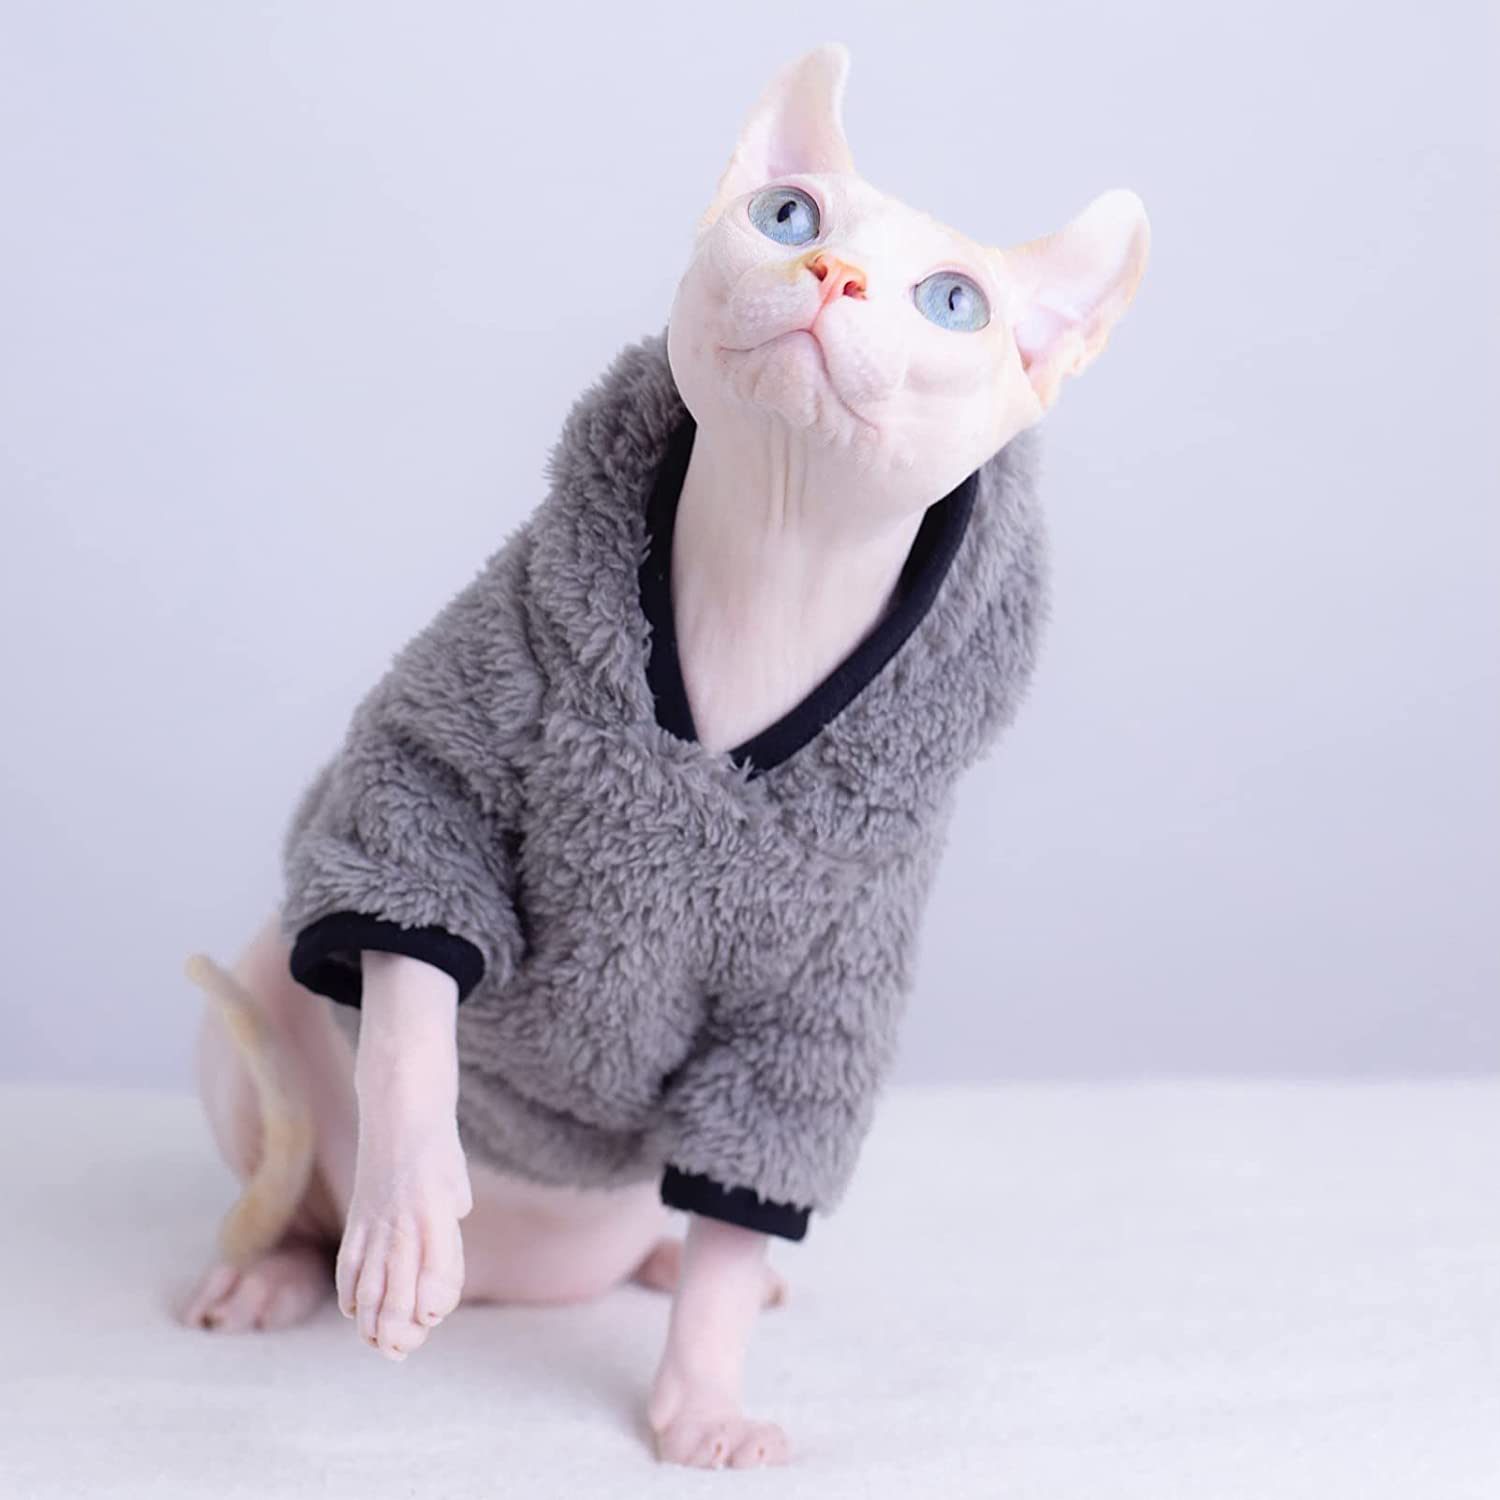 Sphynx Hairless Cat Clothes Winter Thick Warm Soft Vest Hoodies Pajamas for Cats Pet Clothes Pullover Kitten Shirts with Sleeves (Gray, M(4.4-5.5Lbs))